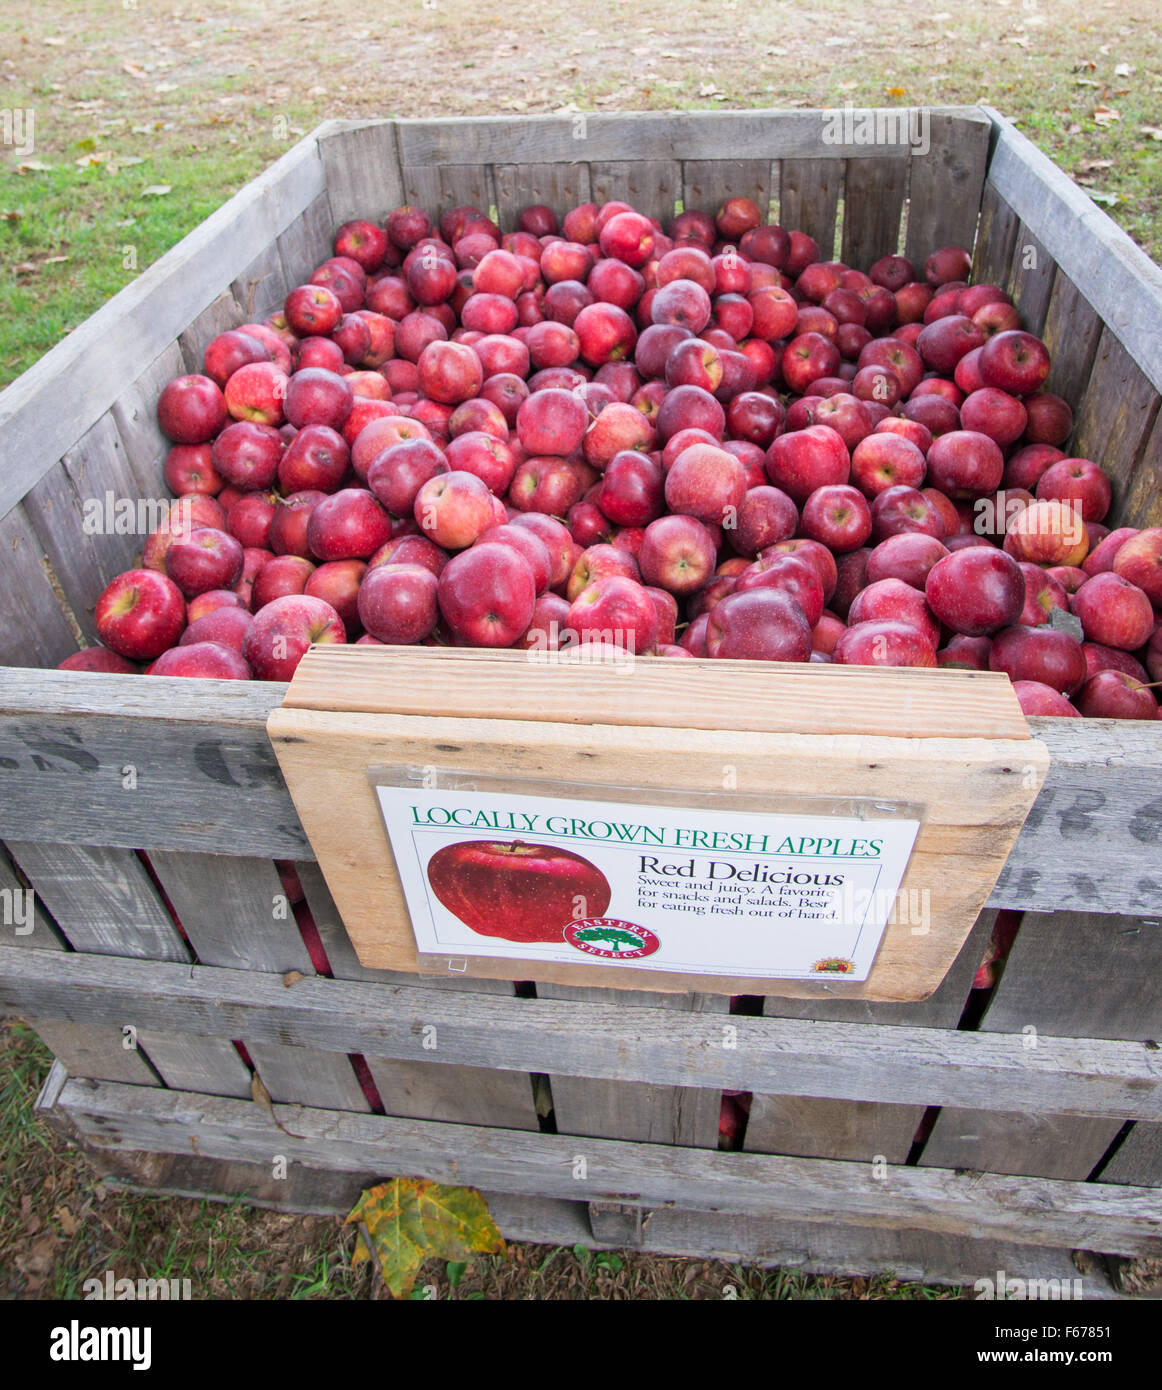 Crate of locally grown Red Delicious apples at Graves' Mountain Apple Harvest Festival, Virginia, USA Stock Photo